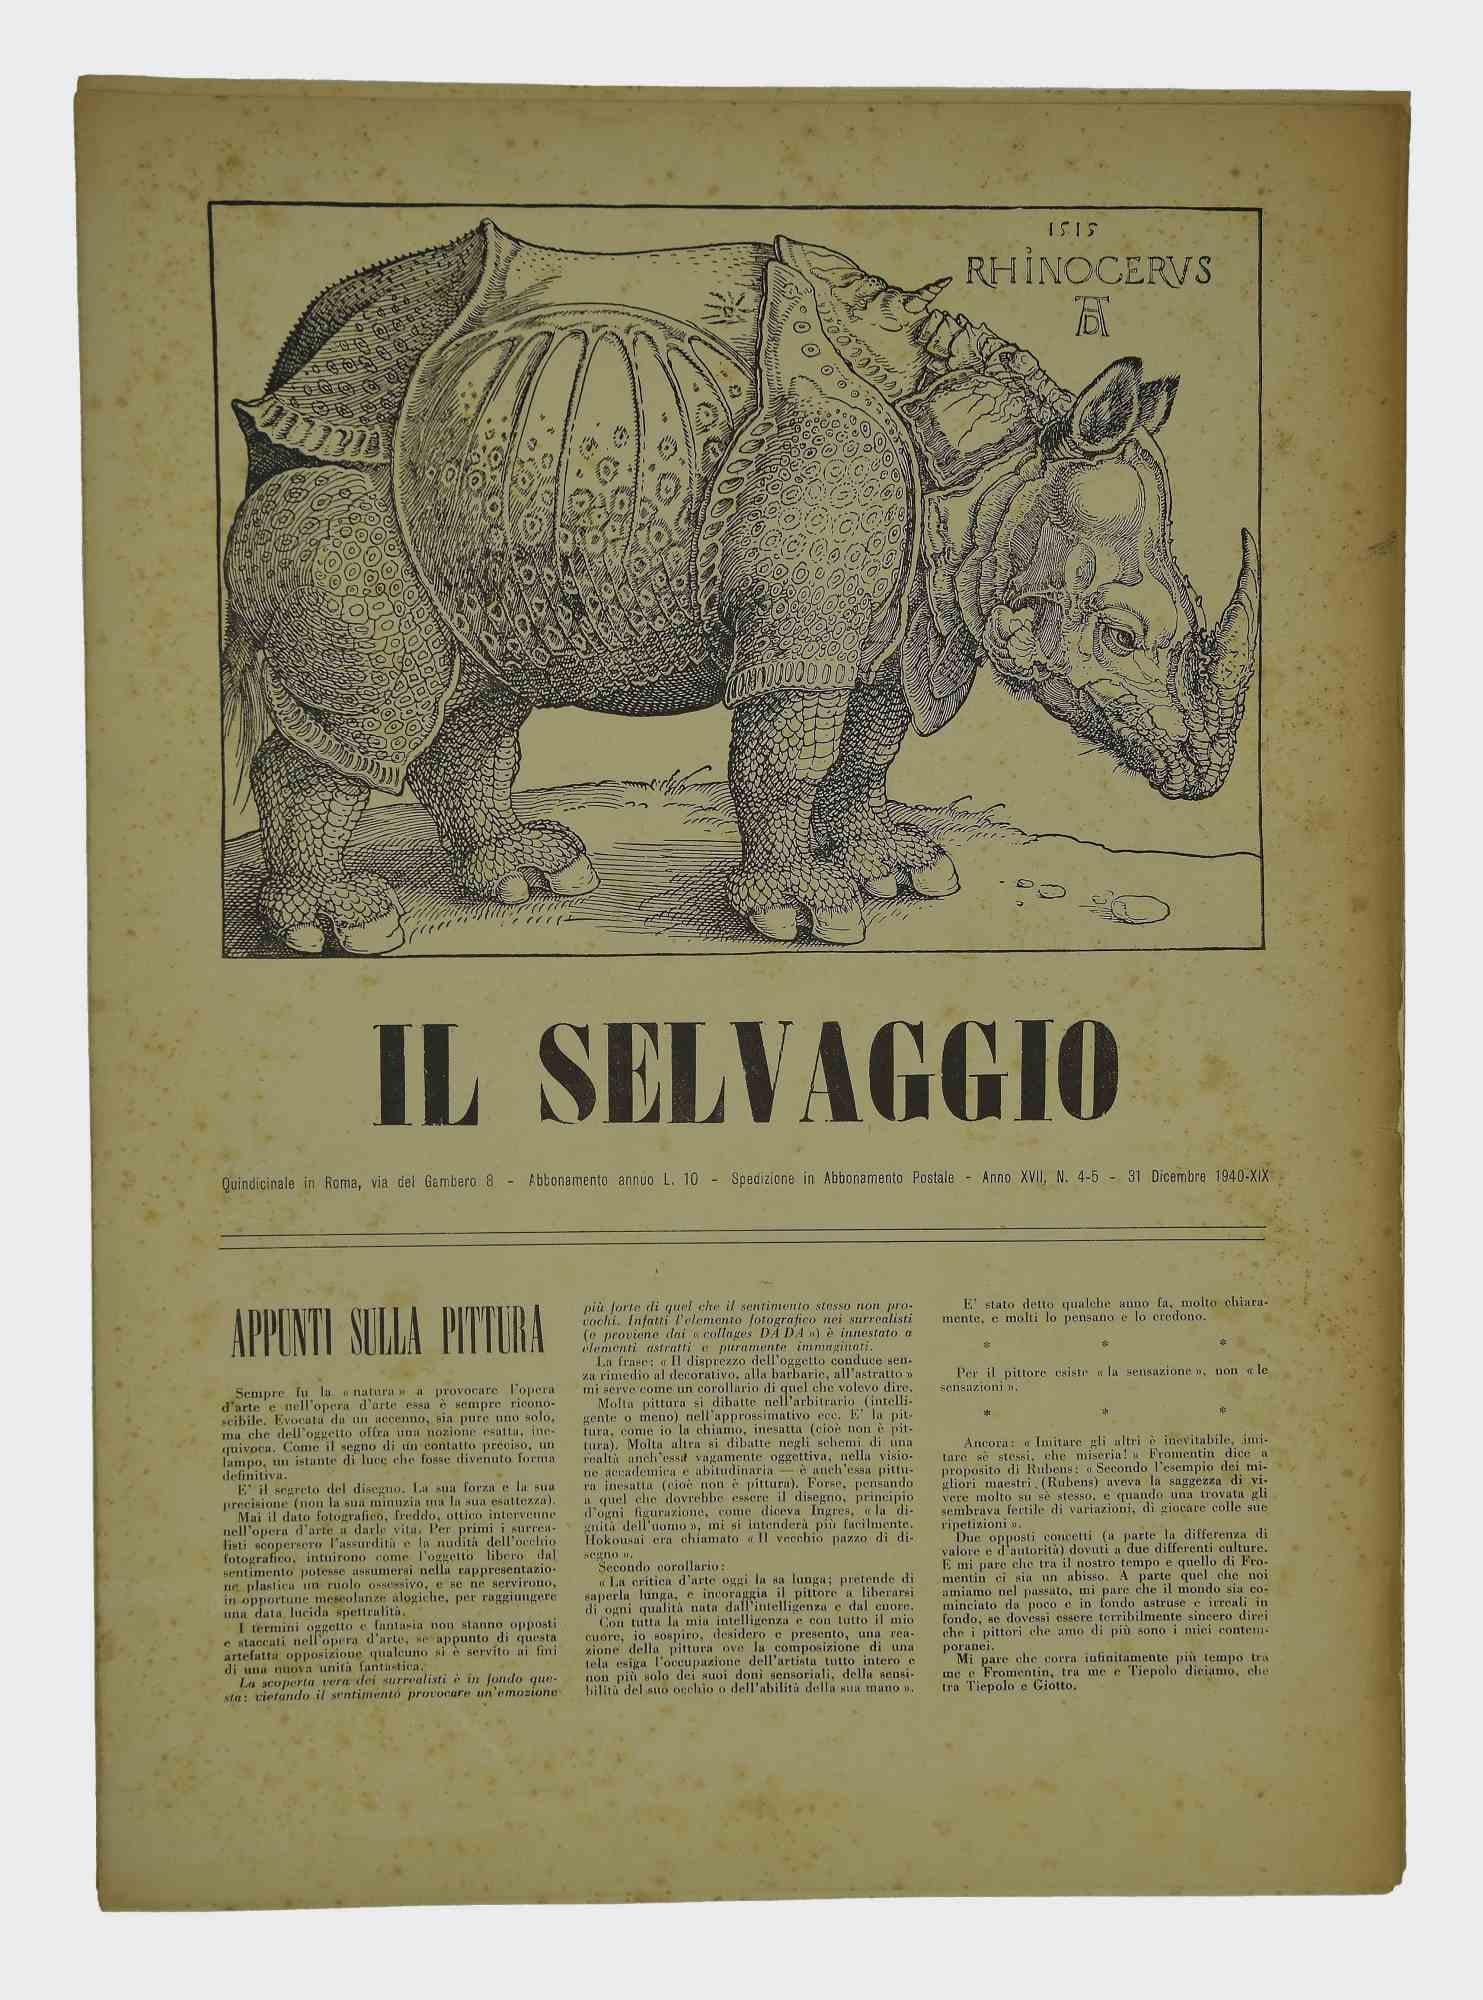 Flipping through a few pages of " Il Selvaggio, No.4-5 1940 " 31 Dicembre 1940-Anno-XIX", "Annual supporter subscription - Una copia 40 Cent - Fortnightly Newspaper letters arts and sciences".

Engravings by the artist Mino Maccari

Good